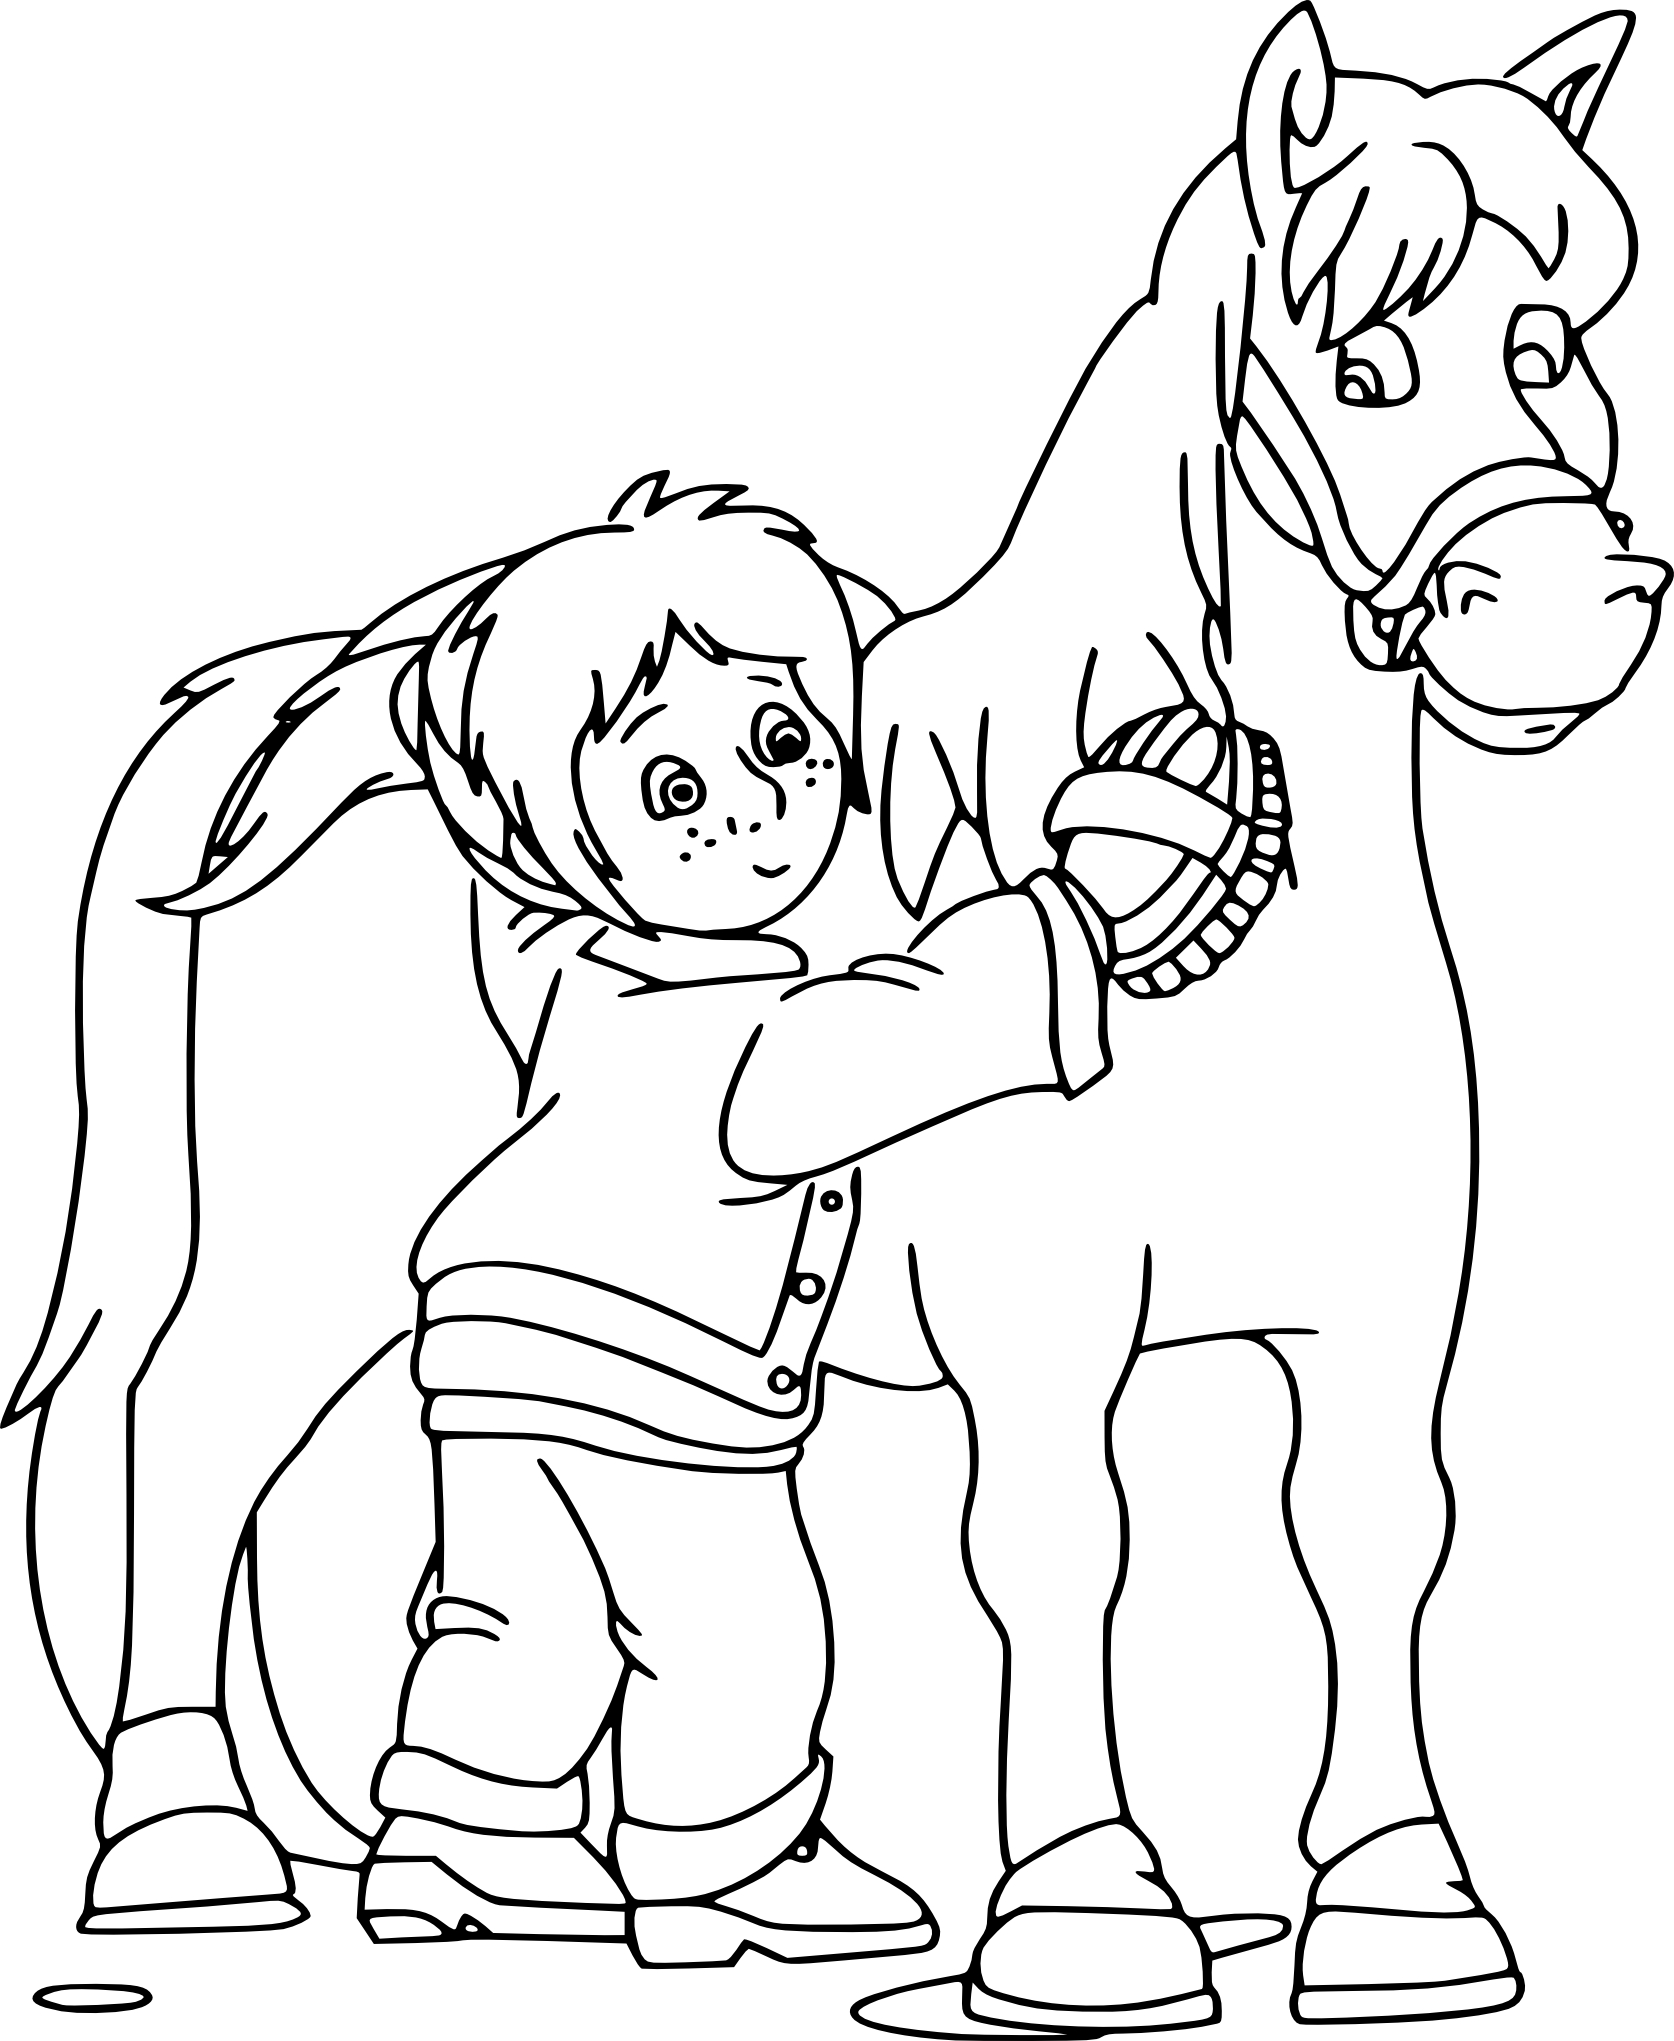 coloriagefillecheval